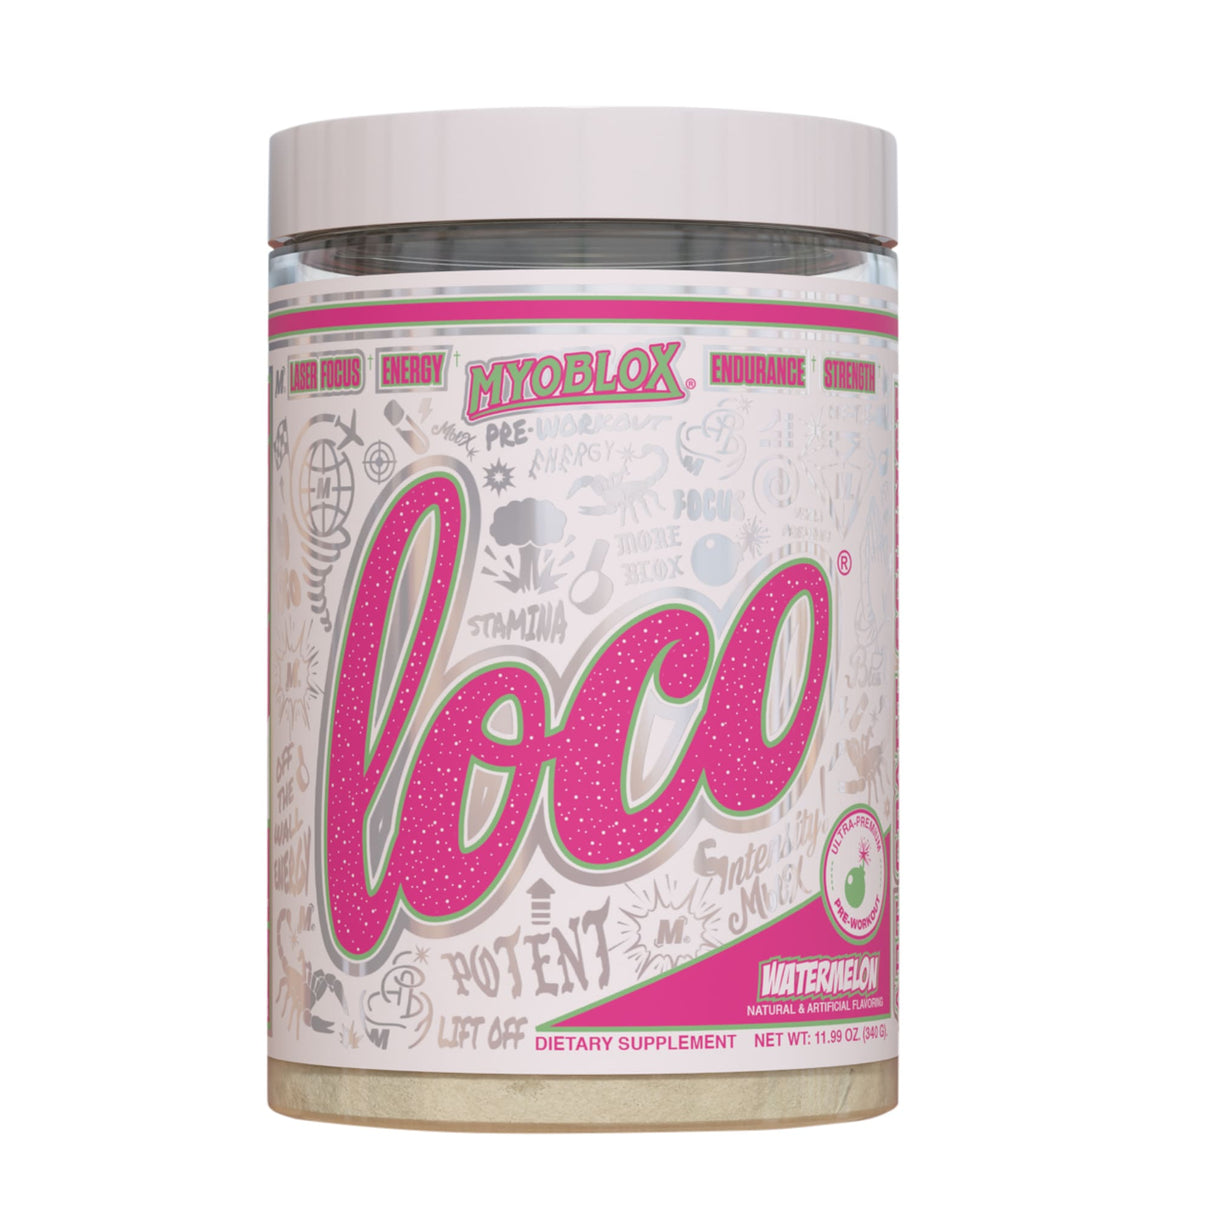 LOCO PRE-WORKOUT - Muscle Factory, LLC